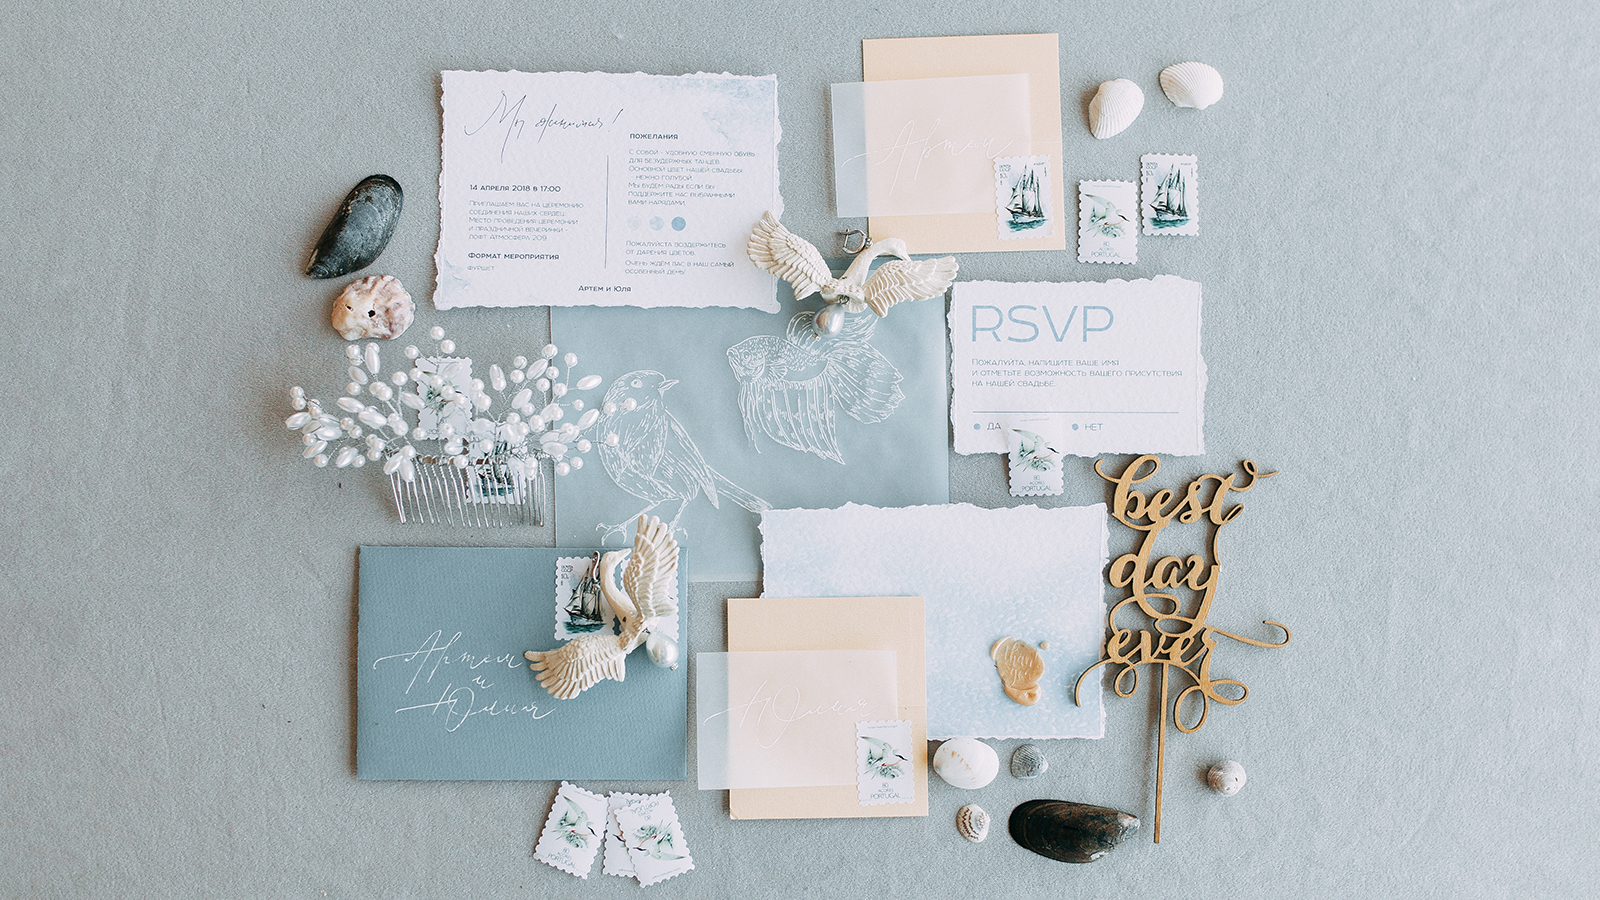 Stylish printing at the wedding ceremony, beautiful details and decor with flowers and rings. Wedding invitations made by hand with calligraphy